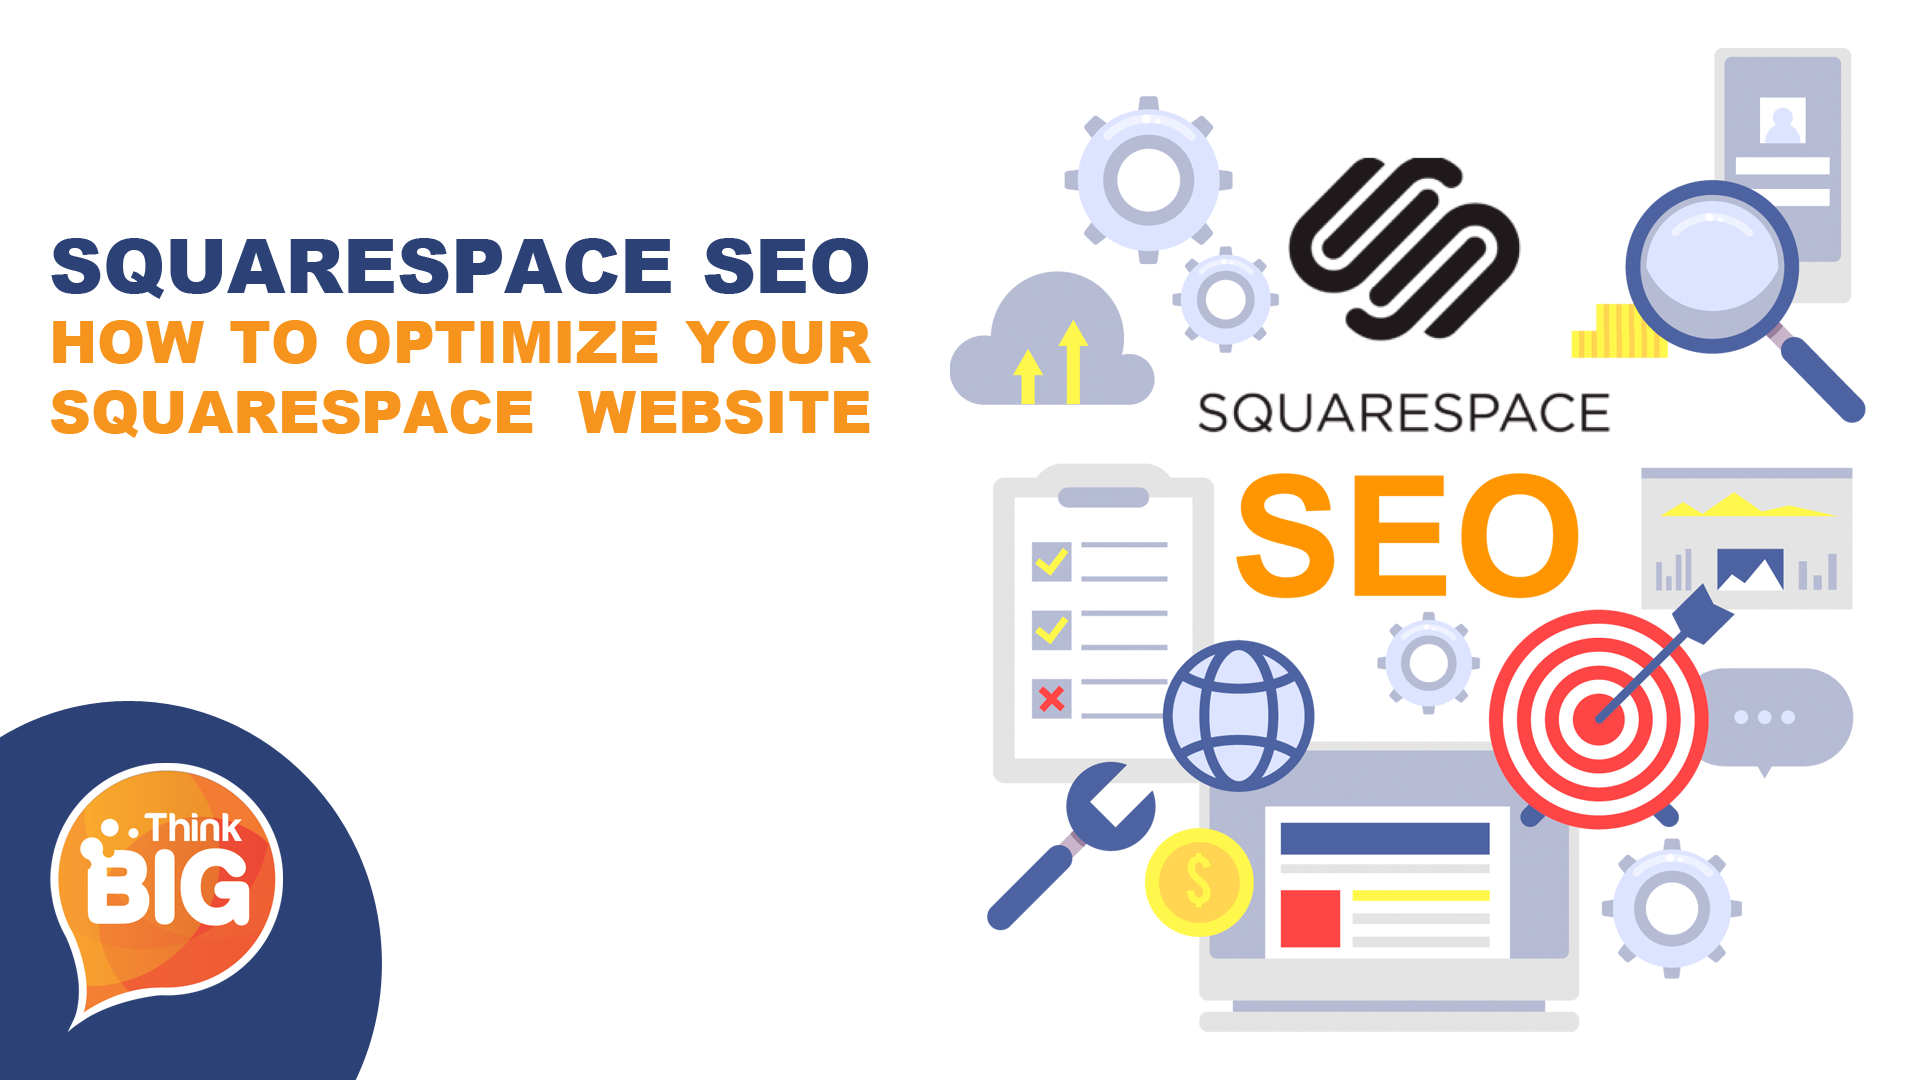 Squarespace SEO: 7 Tips On How to Optimize Your Website